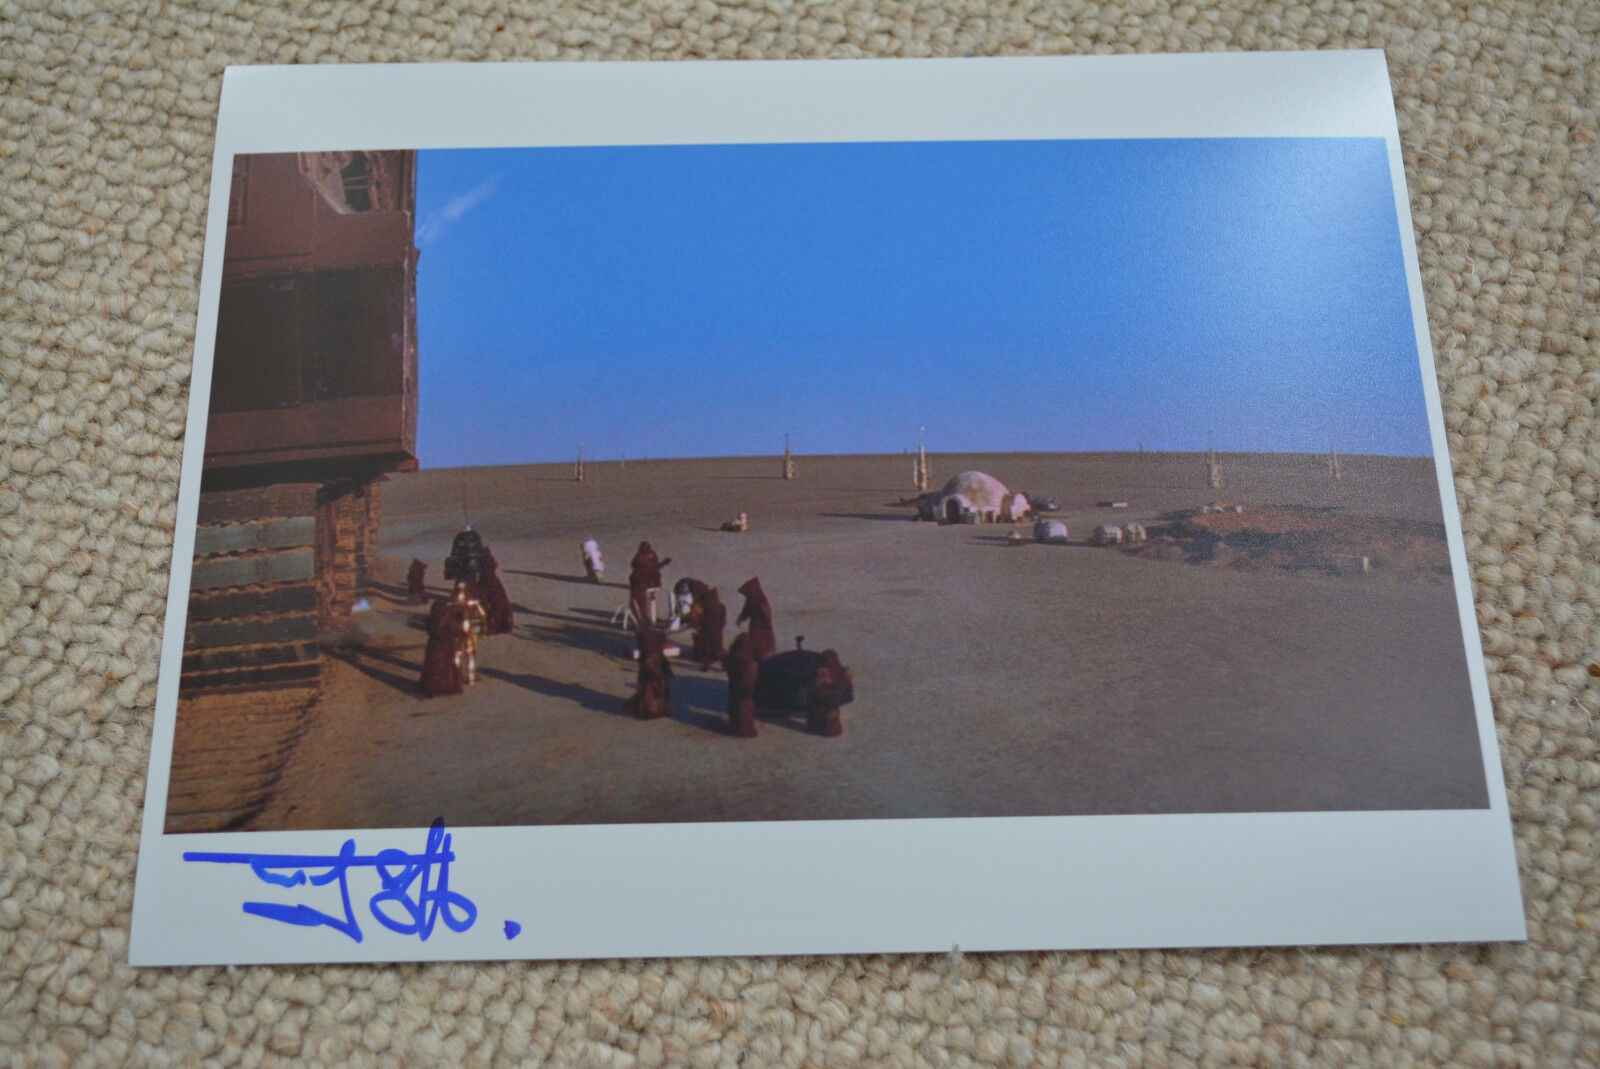 RUSTY GOFFE signed autograph In Person 8x10 (20x25 cm) STAR WARS JAWA